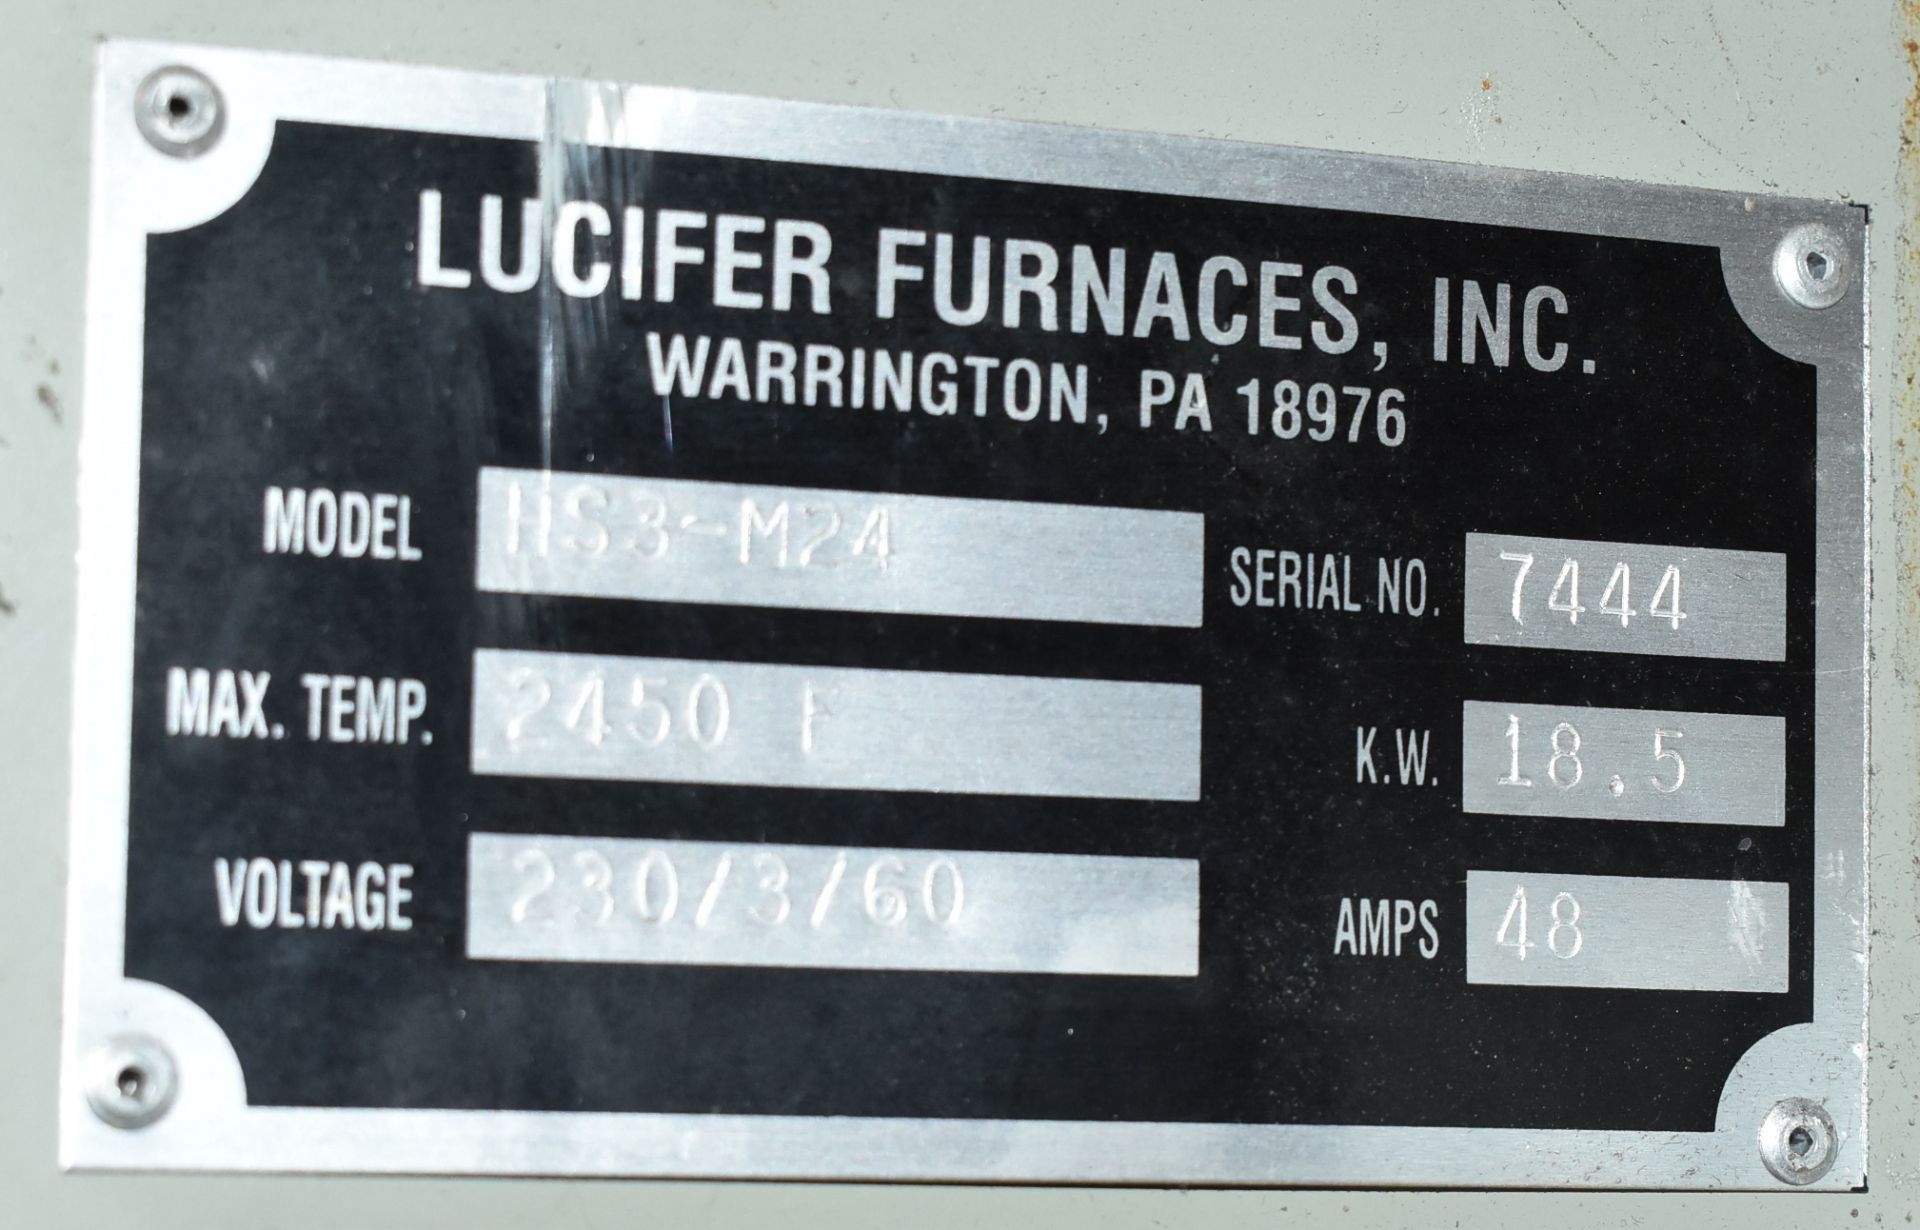 LUCIFER HS3-M24 ELECTRIC BOX FURNACE WITH 2450 DEG. F. MAX. TEMPERATURE, 18.5 KW, 12"X19"X23"D - Image 5 of 5